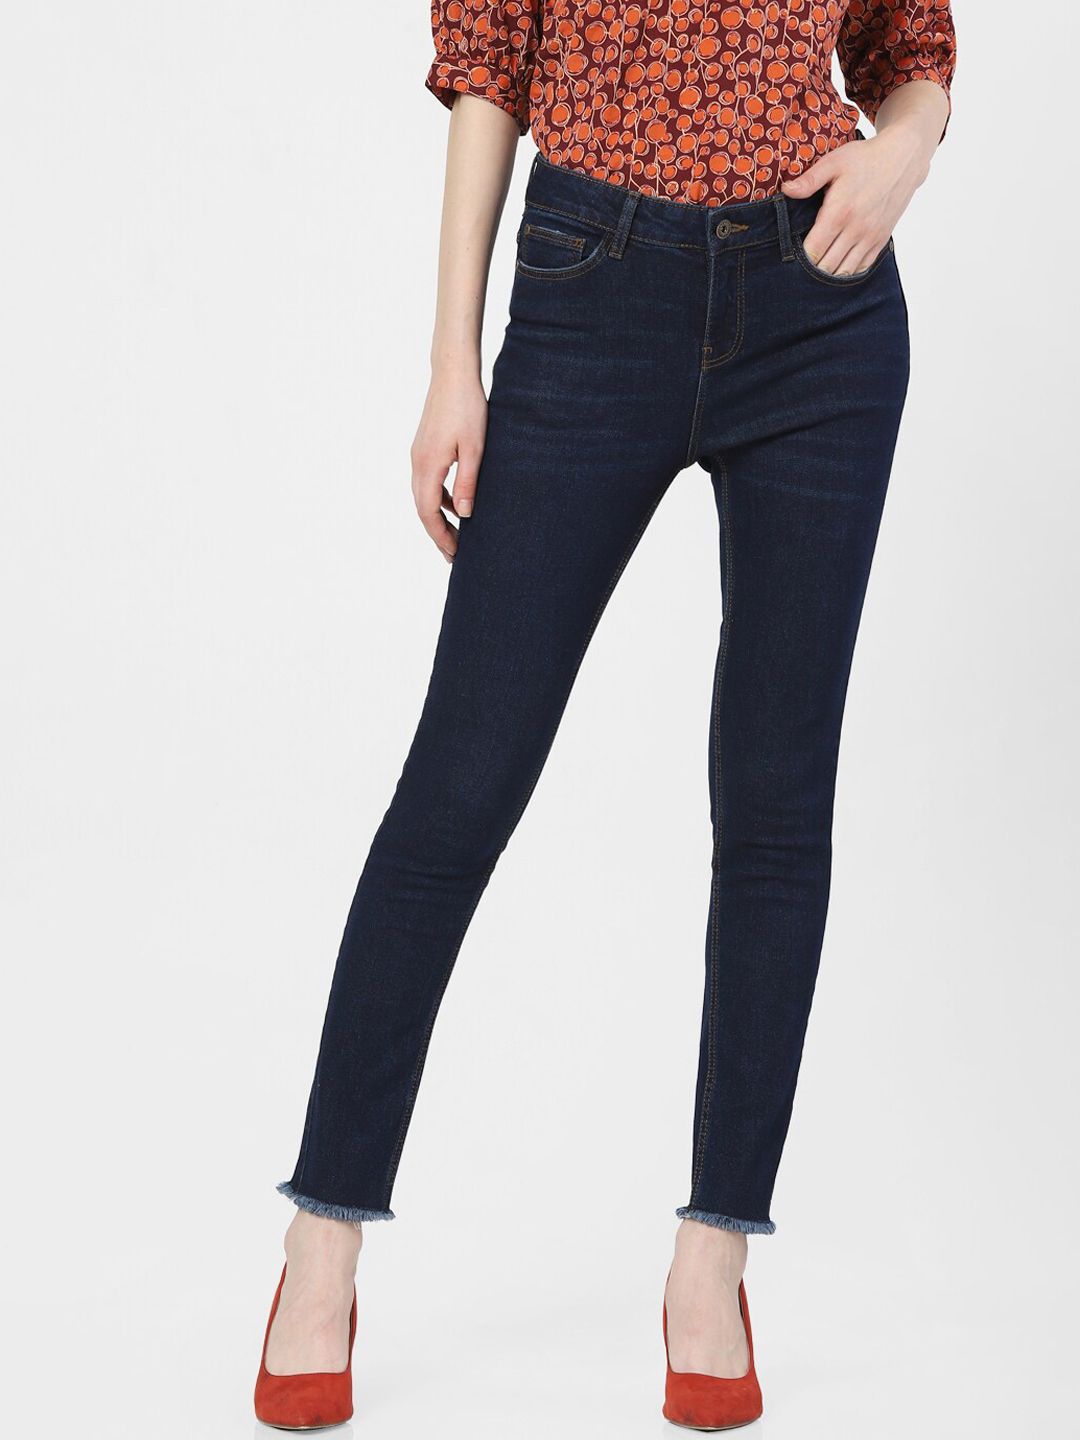 Vero Moda Women Blue High-Rise Stretchable Jeans Price in India